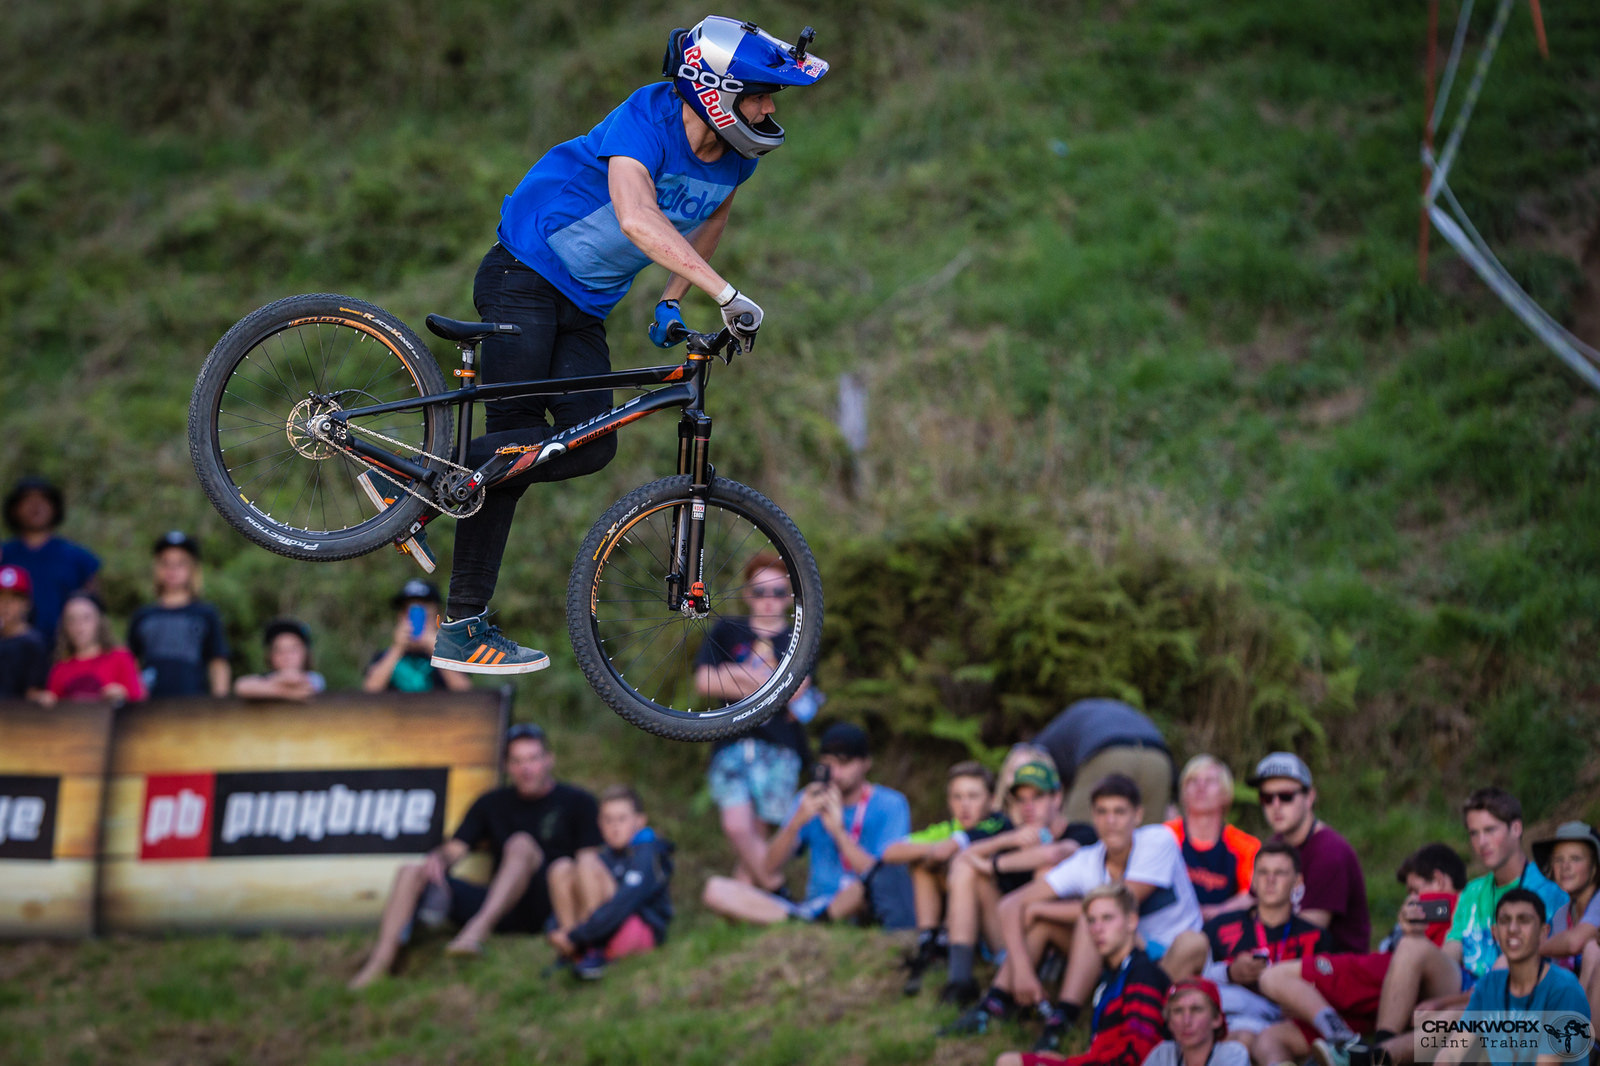 Martin Soderstom performs for the fans during the Mons Royale Dual Speed and Style at Crankworx in Rotorua, New Zealand. Photo - Clint Trahan